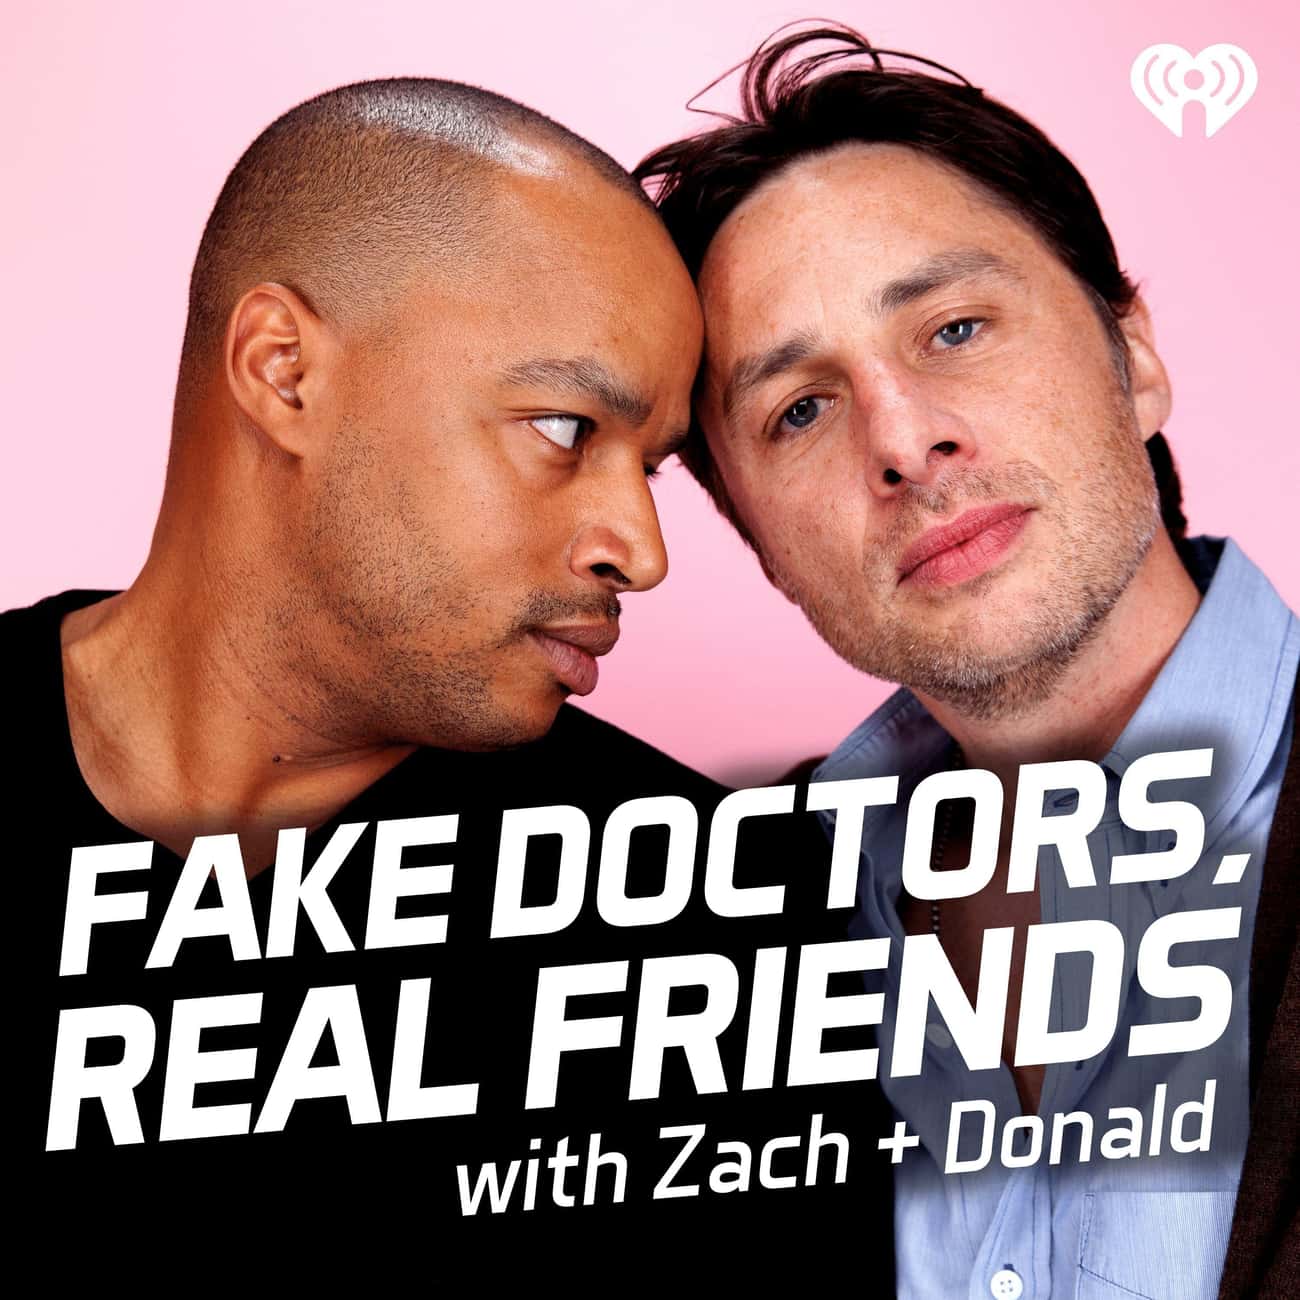 'Fake Doctors, Real Friends (with Zach and Donald)'